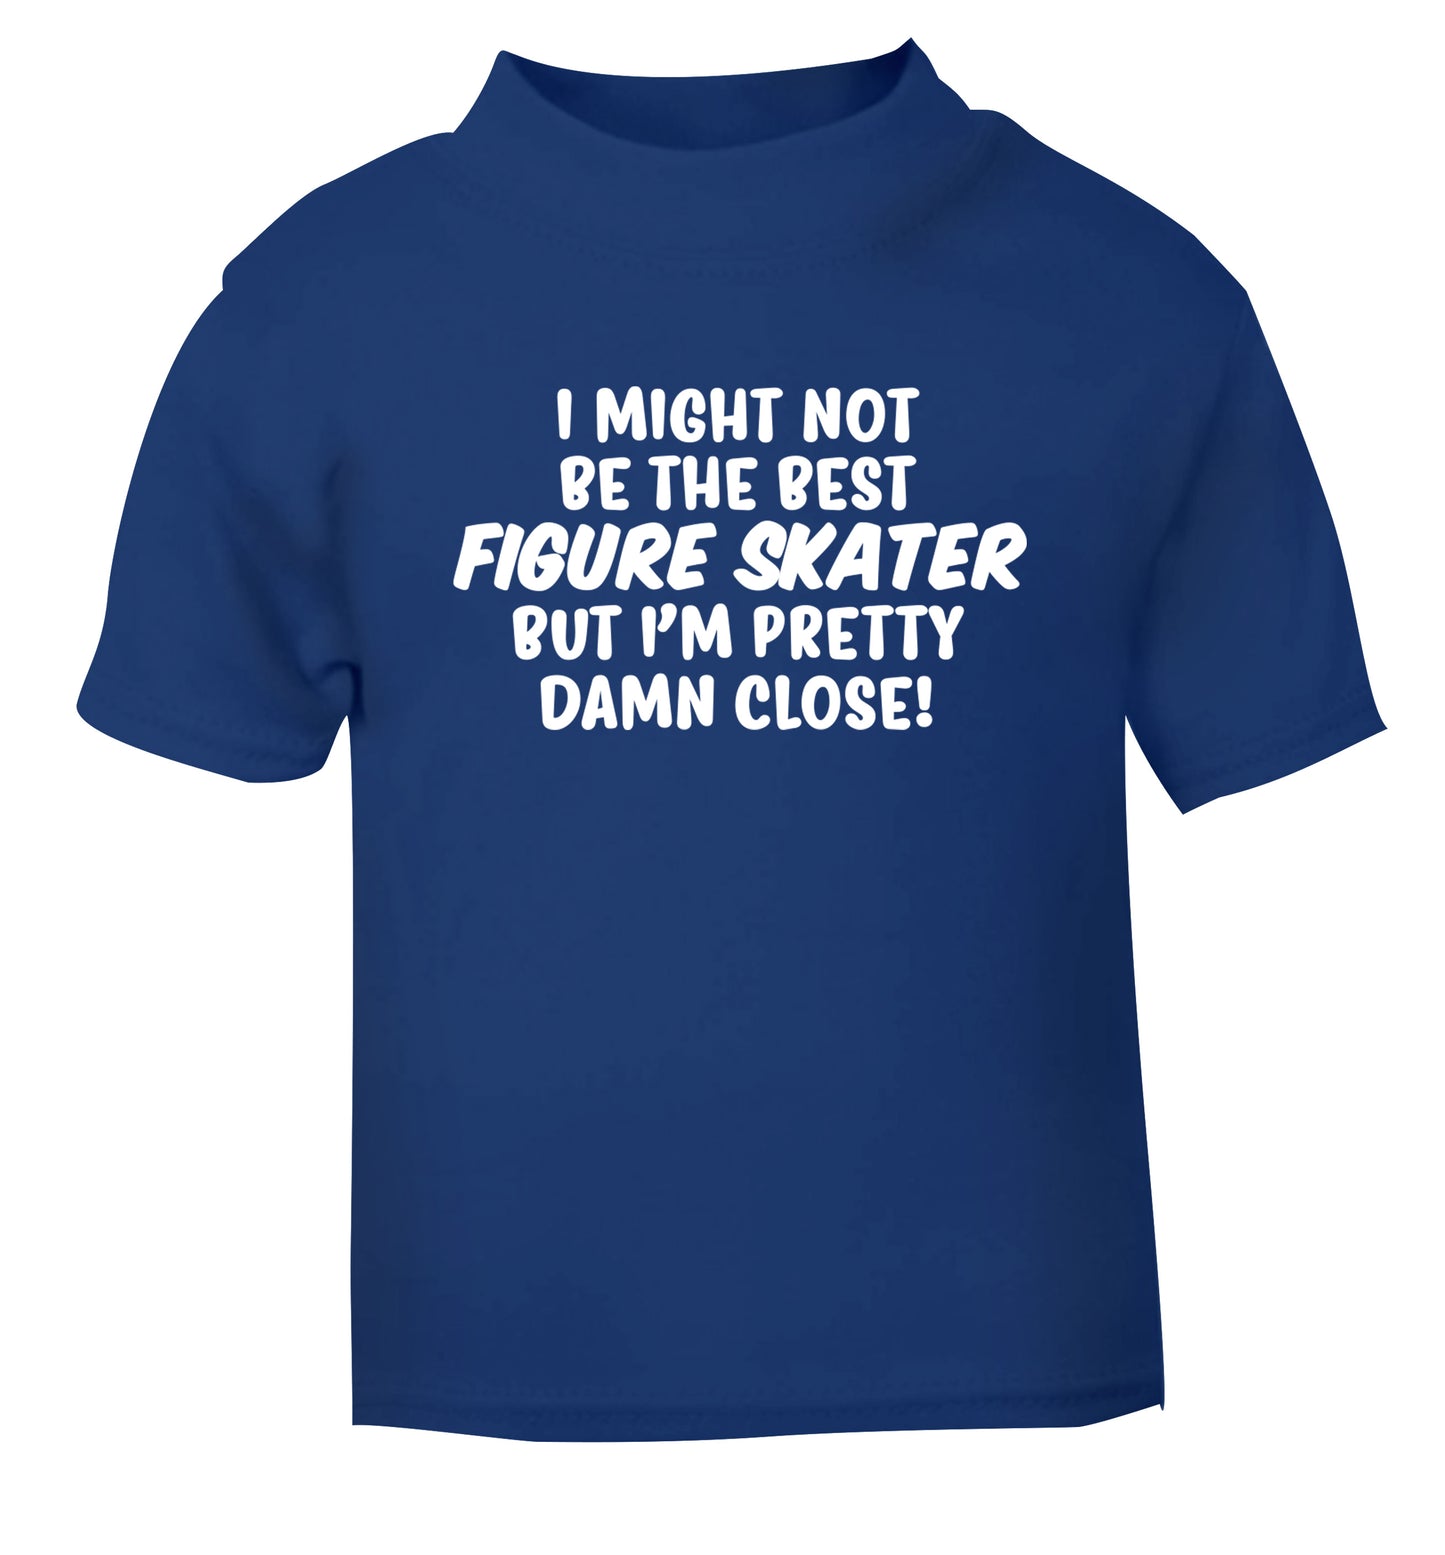 I might not be the best figure skater but I'm pretty damn close! blue Baby Toddler Tshirt 2 Years